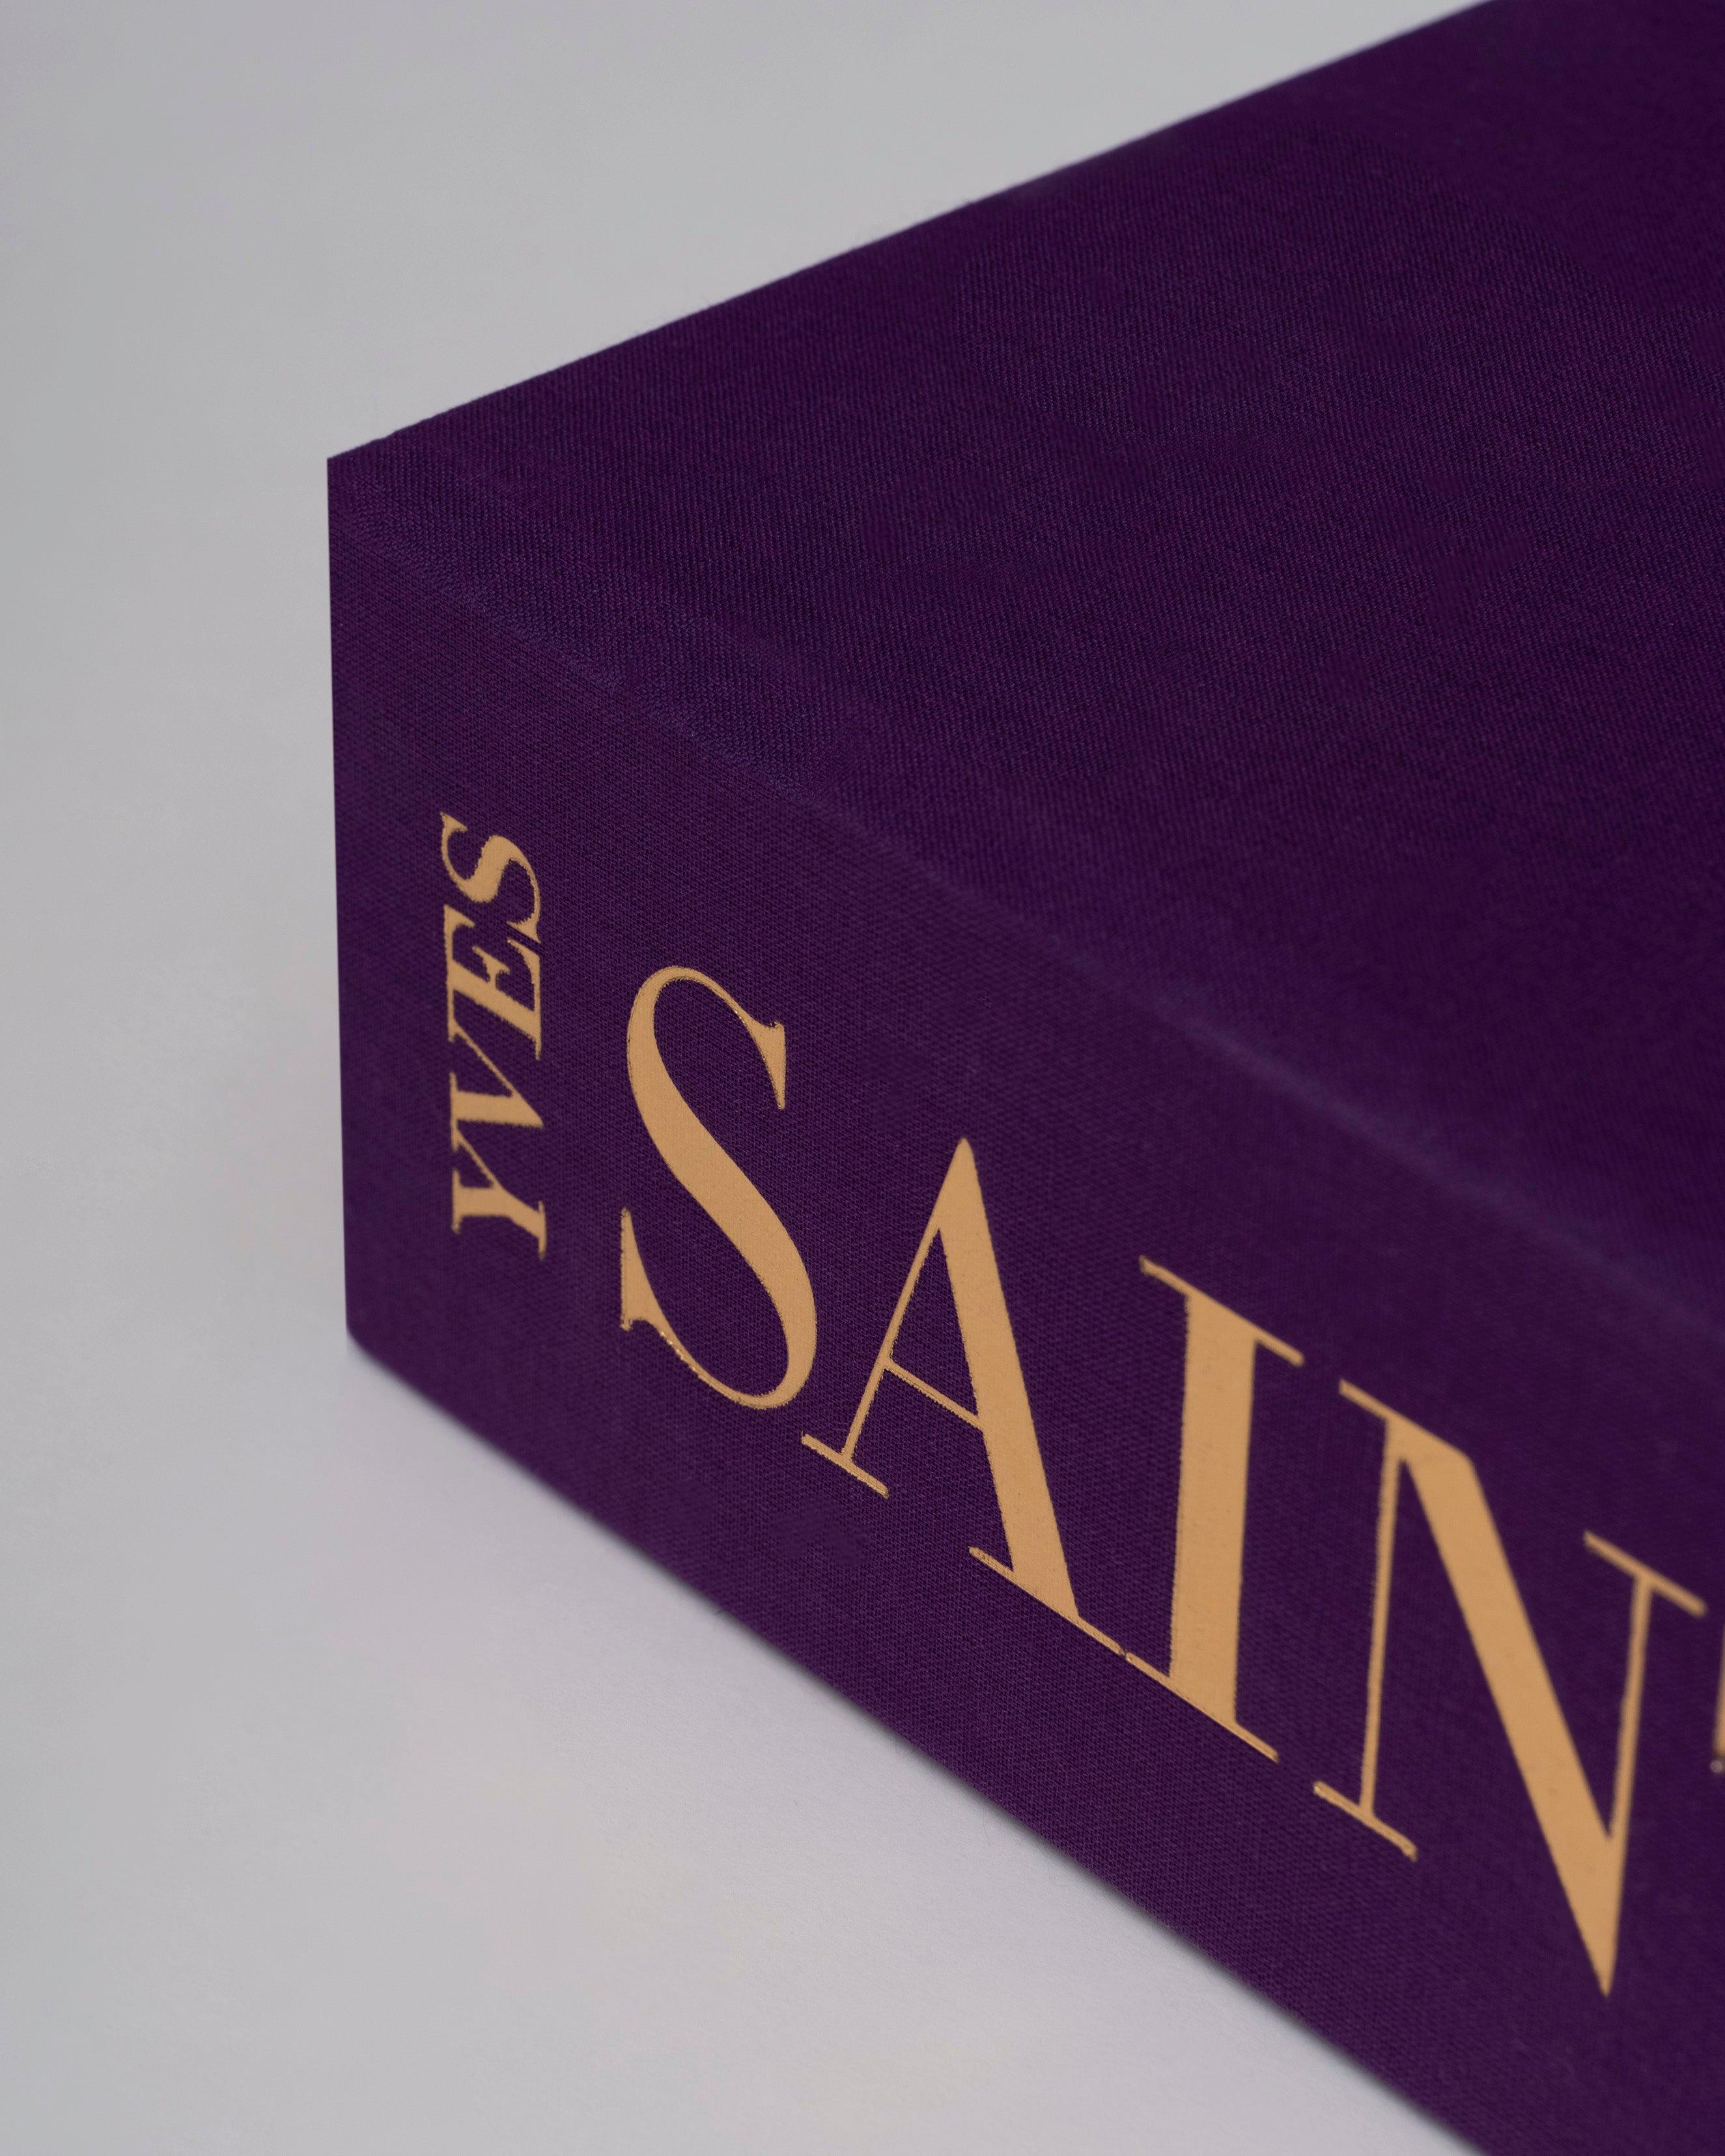 Yves Saint-Laurent: The Impossible Collection book by ASSOULINE 